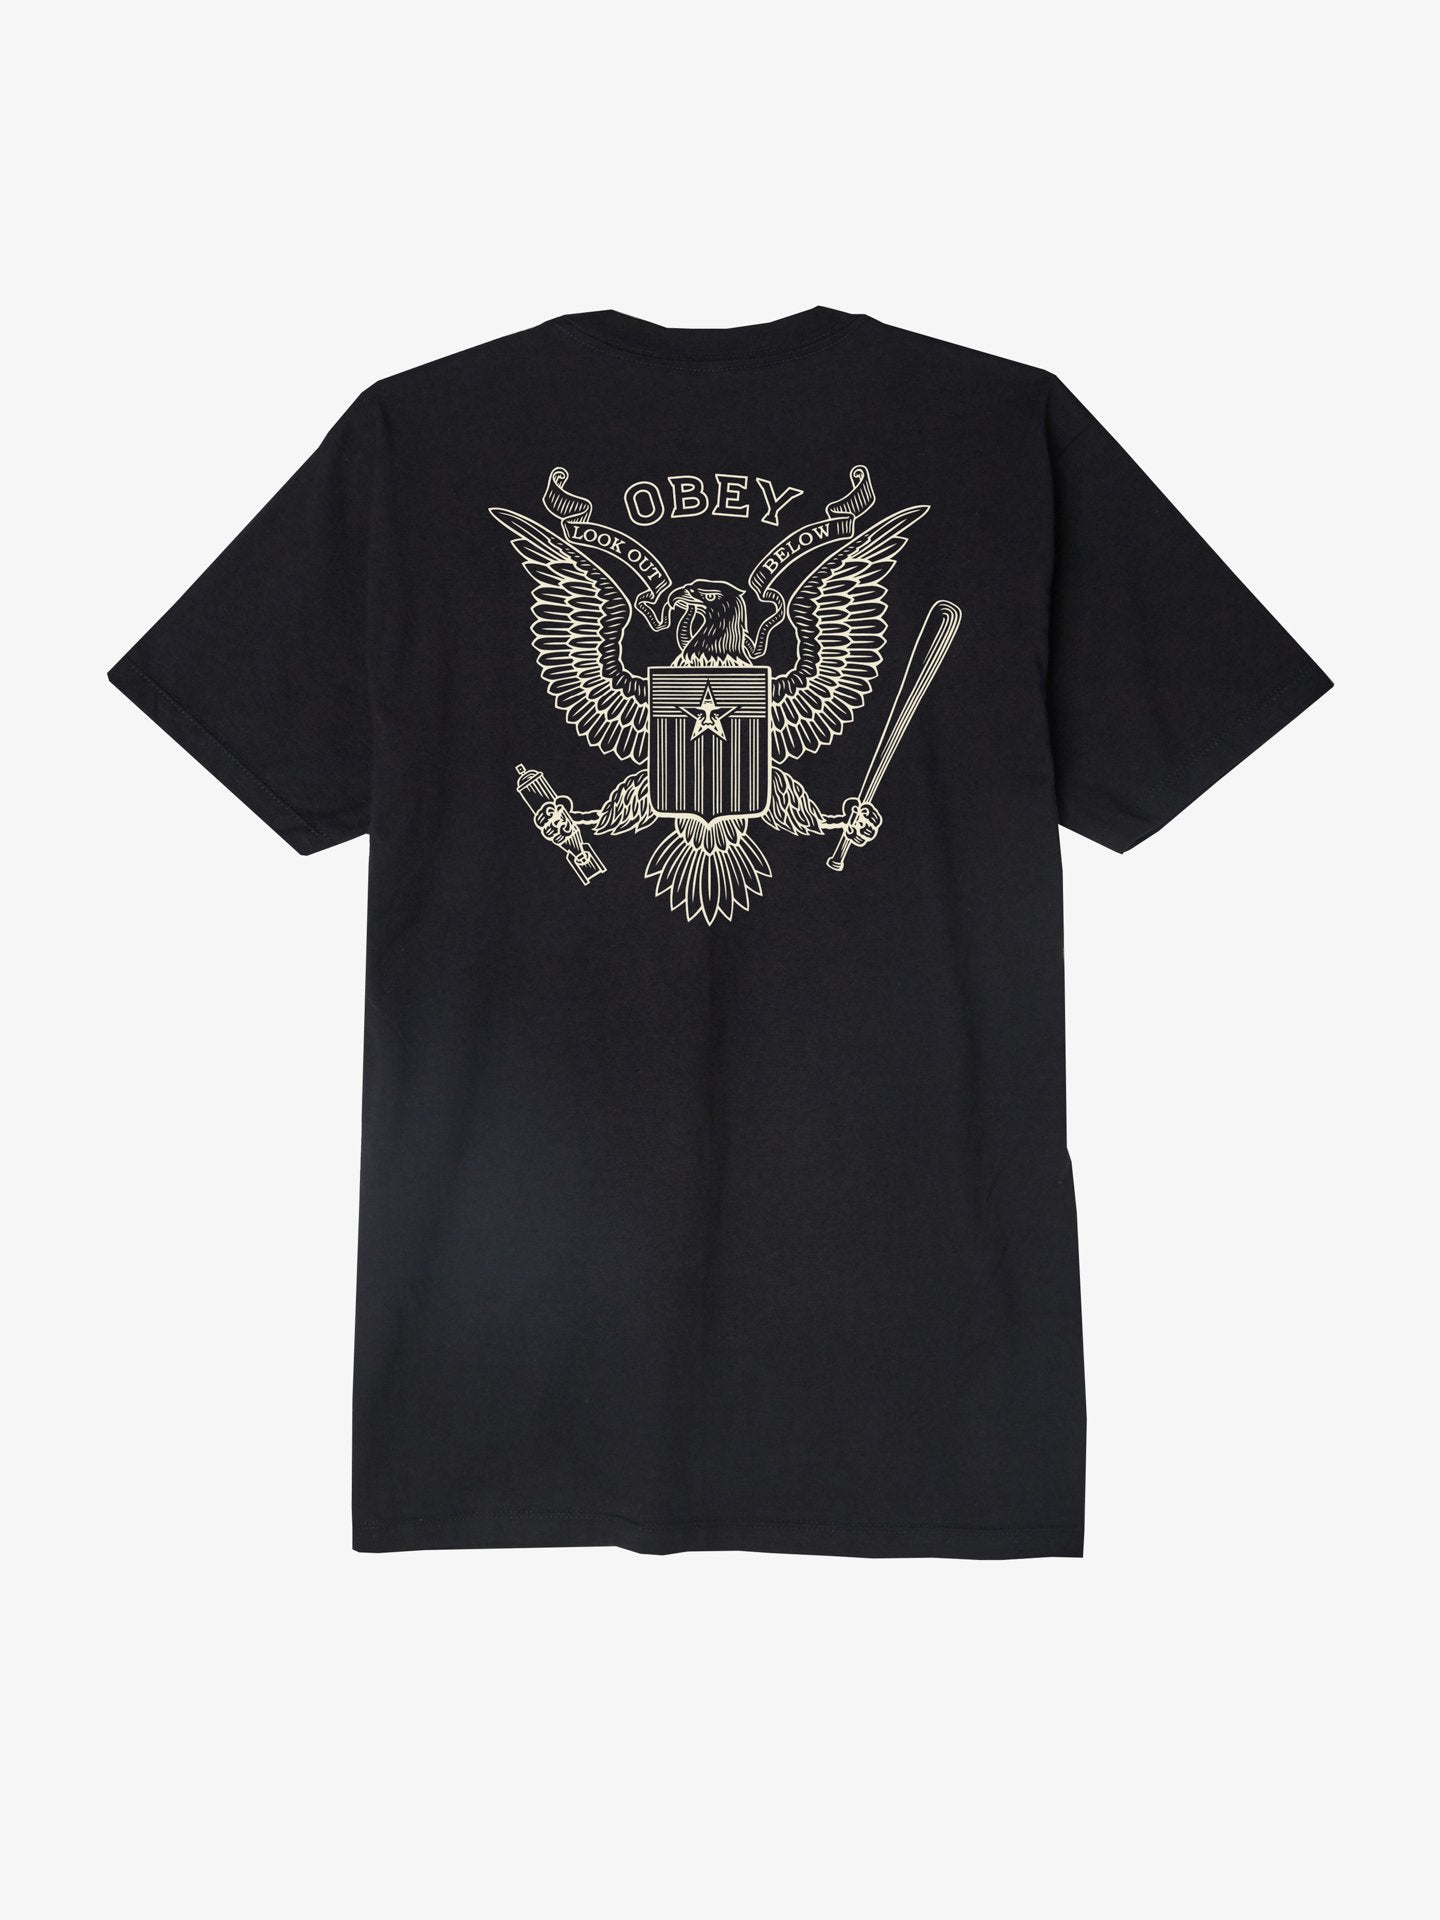 OBEY - Look Out Below Men's Shirt, Black - The Giant Peach